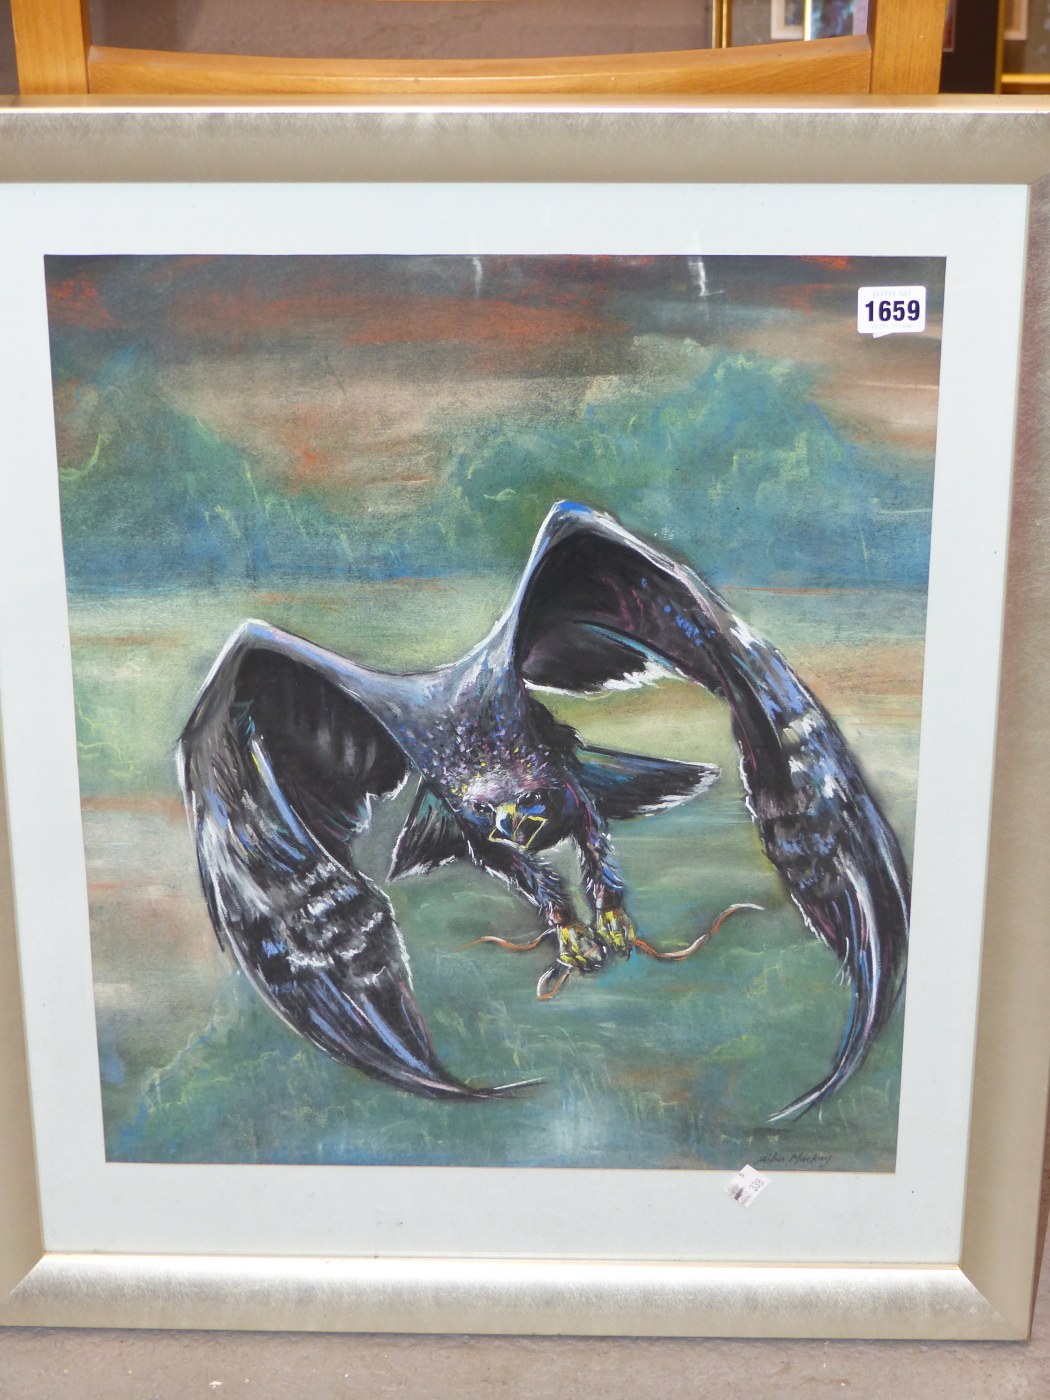 AILSA MACKAY (20TH / 21ST CENTURY) ARR. EAGLE IN FLIGHT WITH SNAKE. PASTEL. SIGNED L/R. 41 X 50 cm. - Image 2 of 6